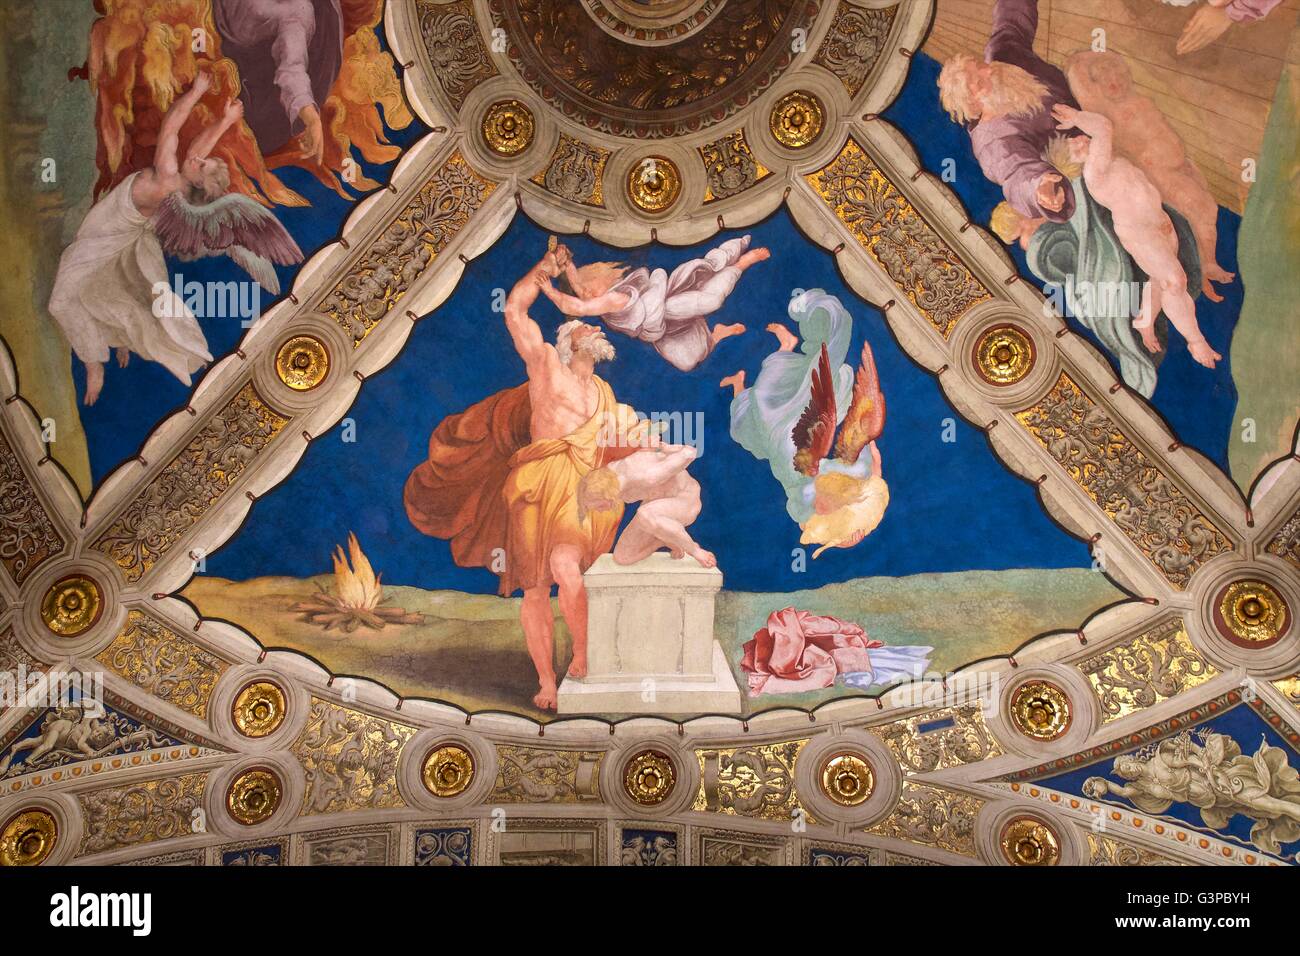 Ceiling frescoes, Room of Heliodorus, Raphael Rooms, Apostolic Palace, Vatican Museums, Rome, Italy Stock Photo